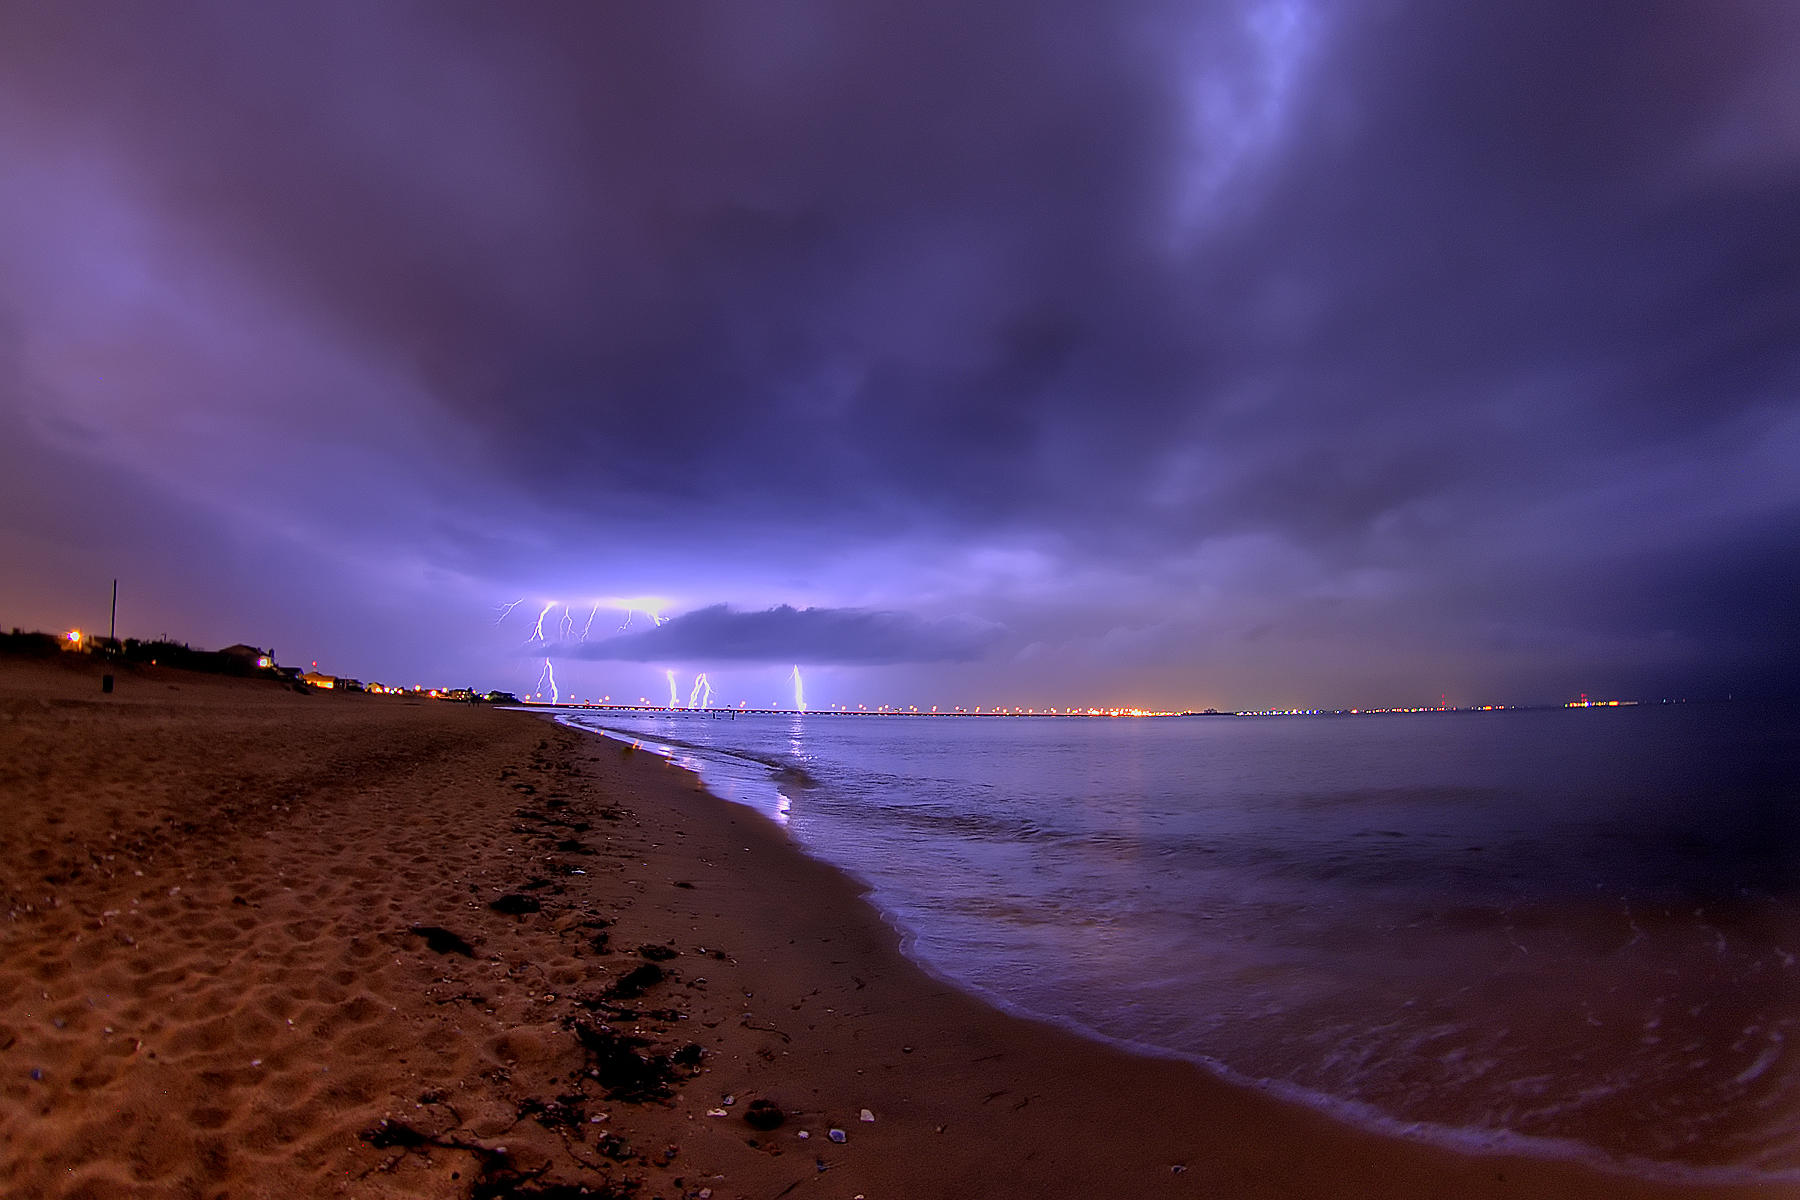 Eight People Are Injured In Lighting At Florida Beach - Lighting On The Beach - HD Wallpaper 